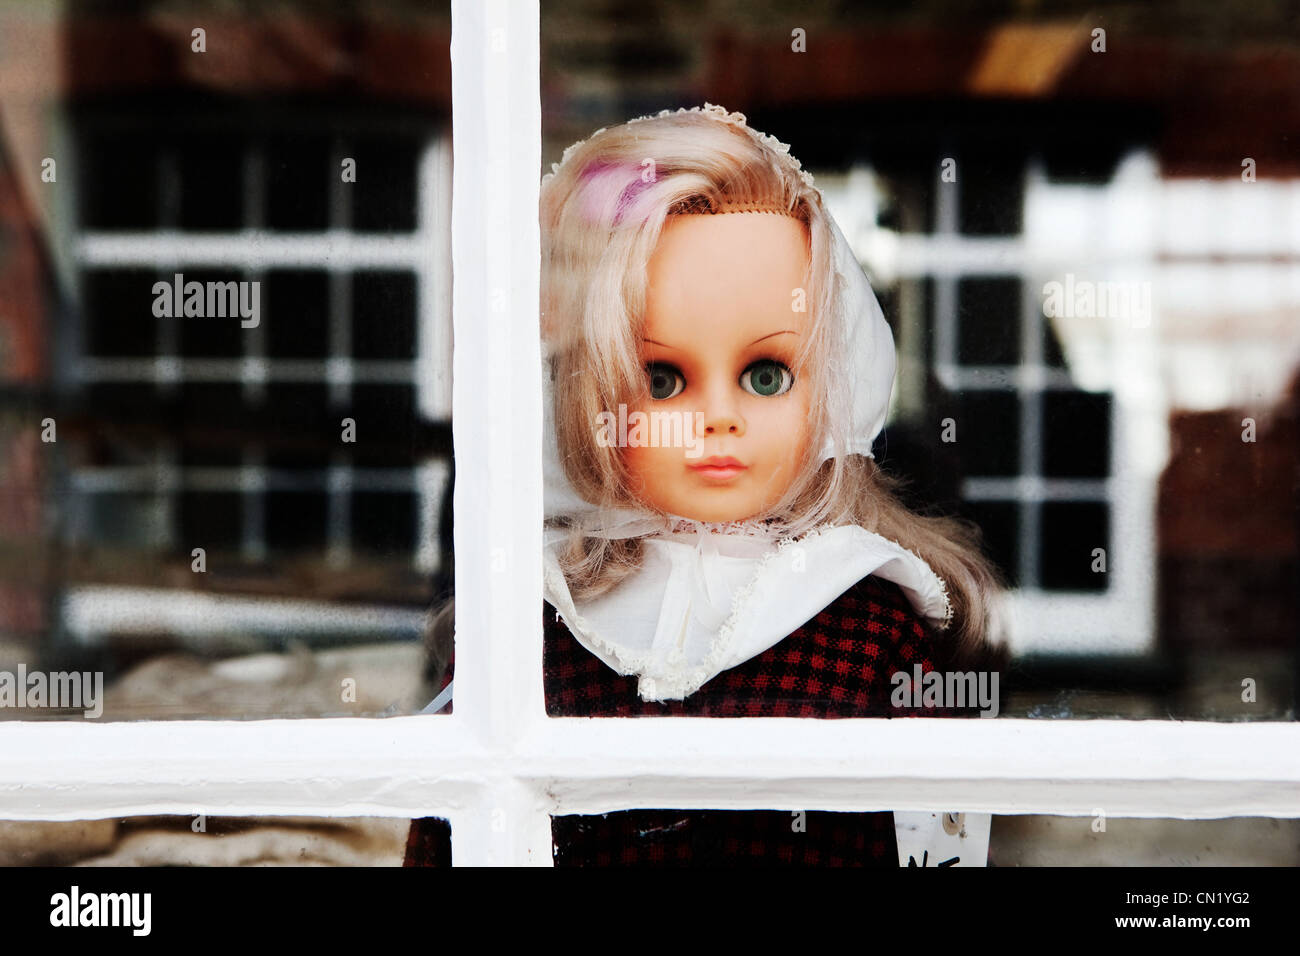 Doll looking out of window Stock Photo